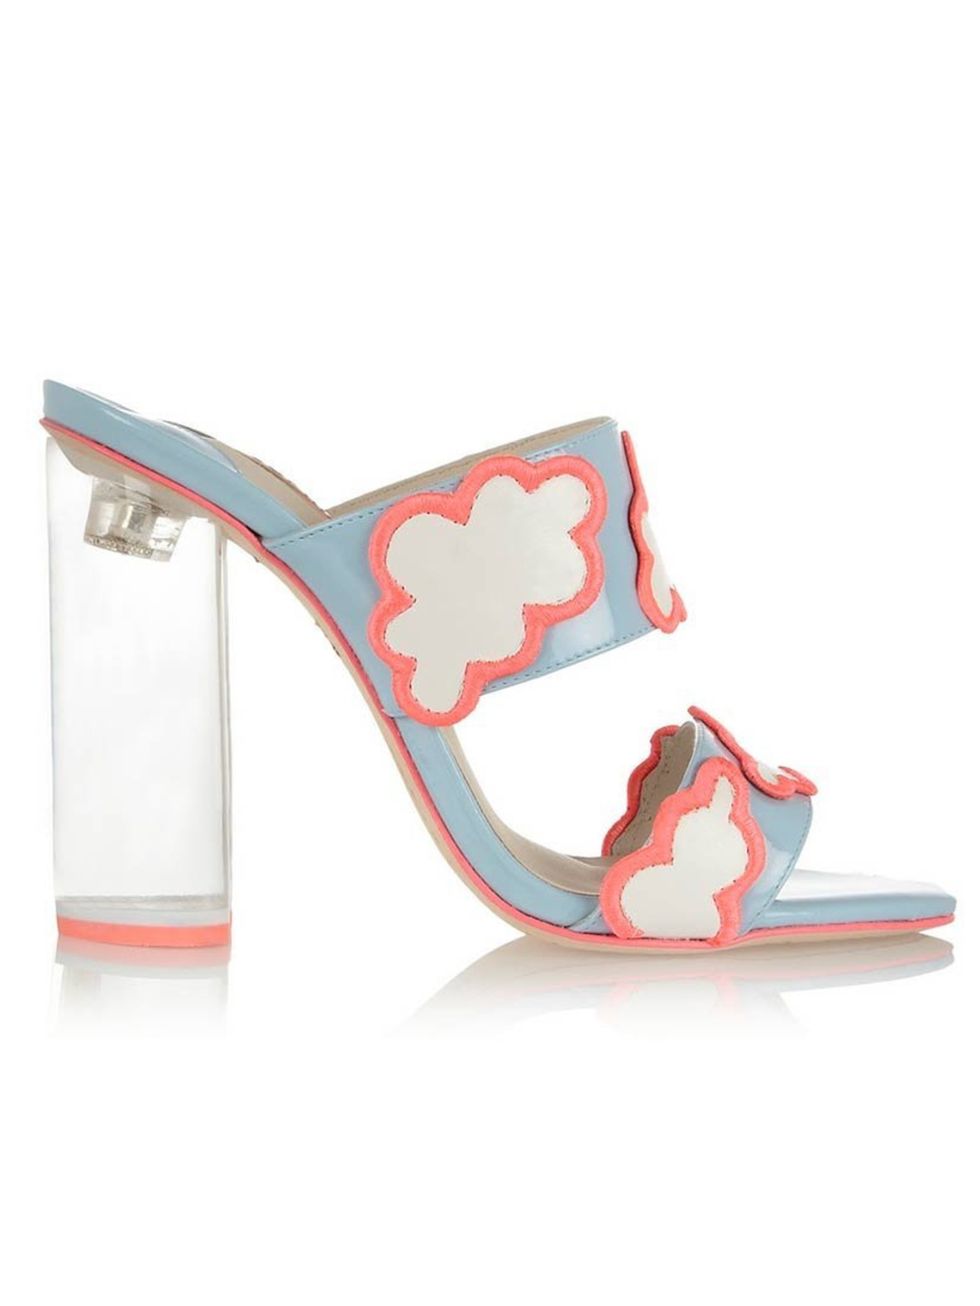 <p>Sophia Webster Skye cloud mules, £395, available from <a href="http://www.net-a-porter.com/product/421787">net-a-porter.com</a></p>